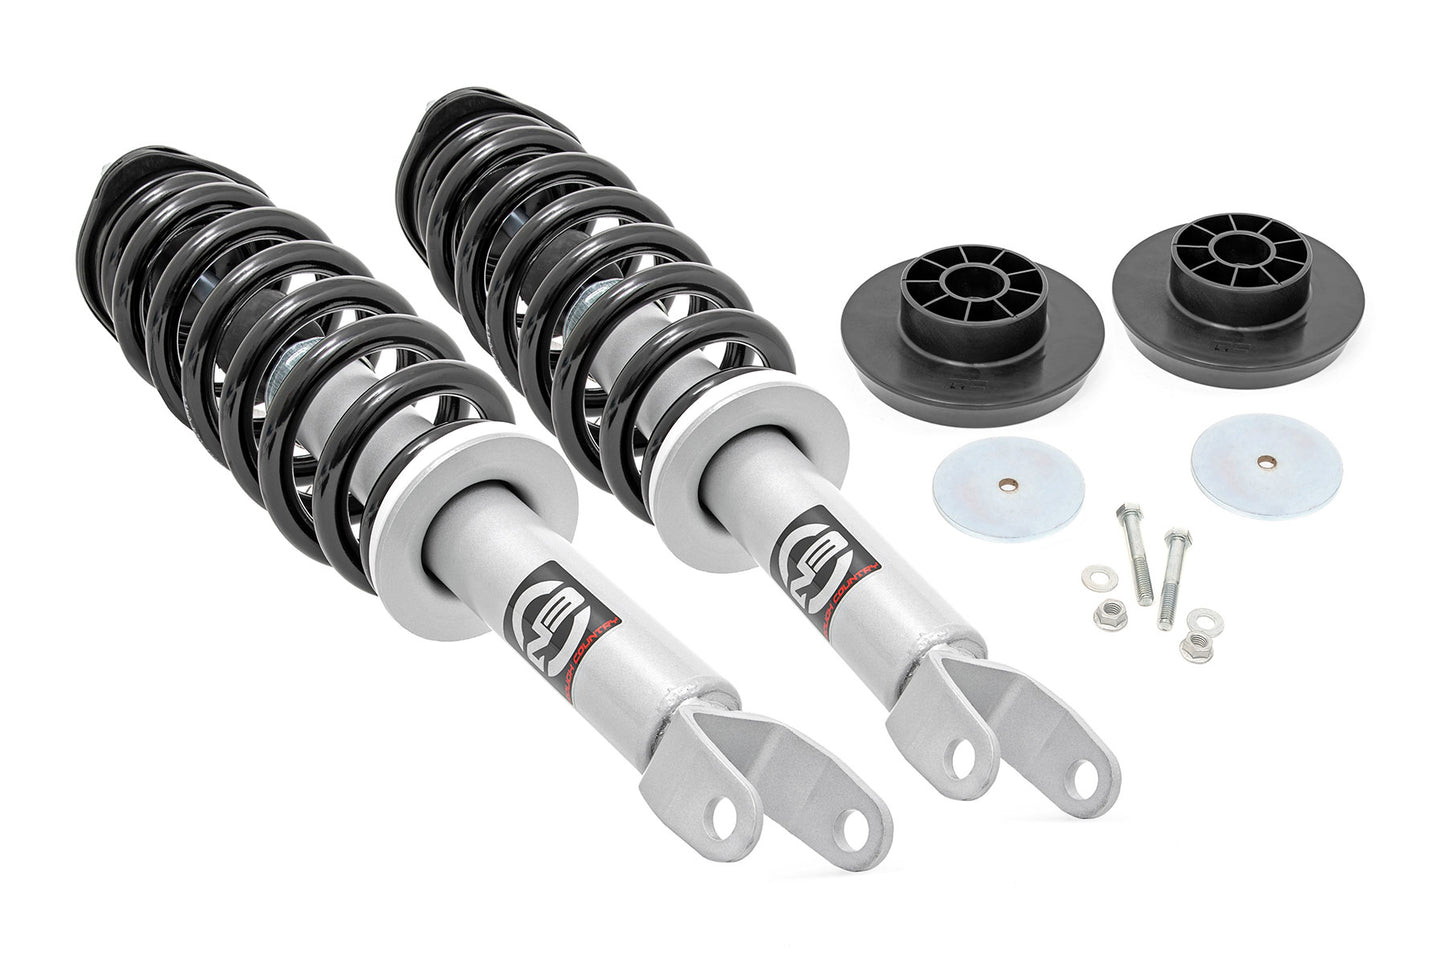 Rough Country (359.23) 2.5 Inch Lift Kit | N3 Struts | Ram 1500 4WD